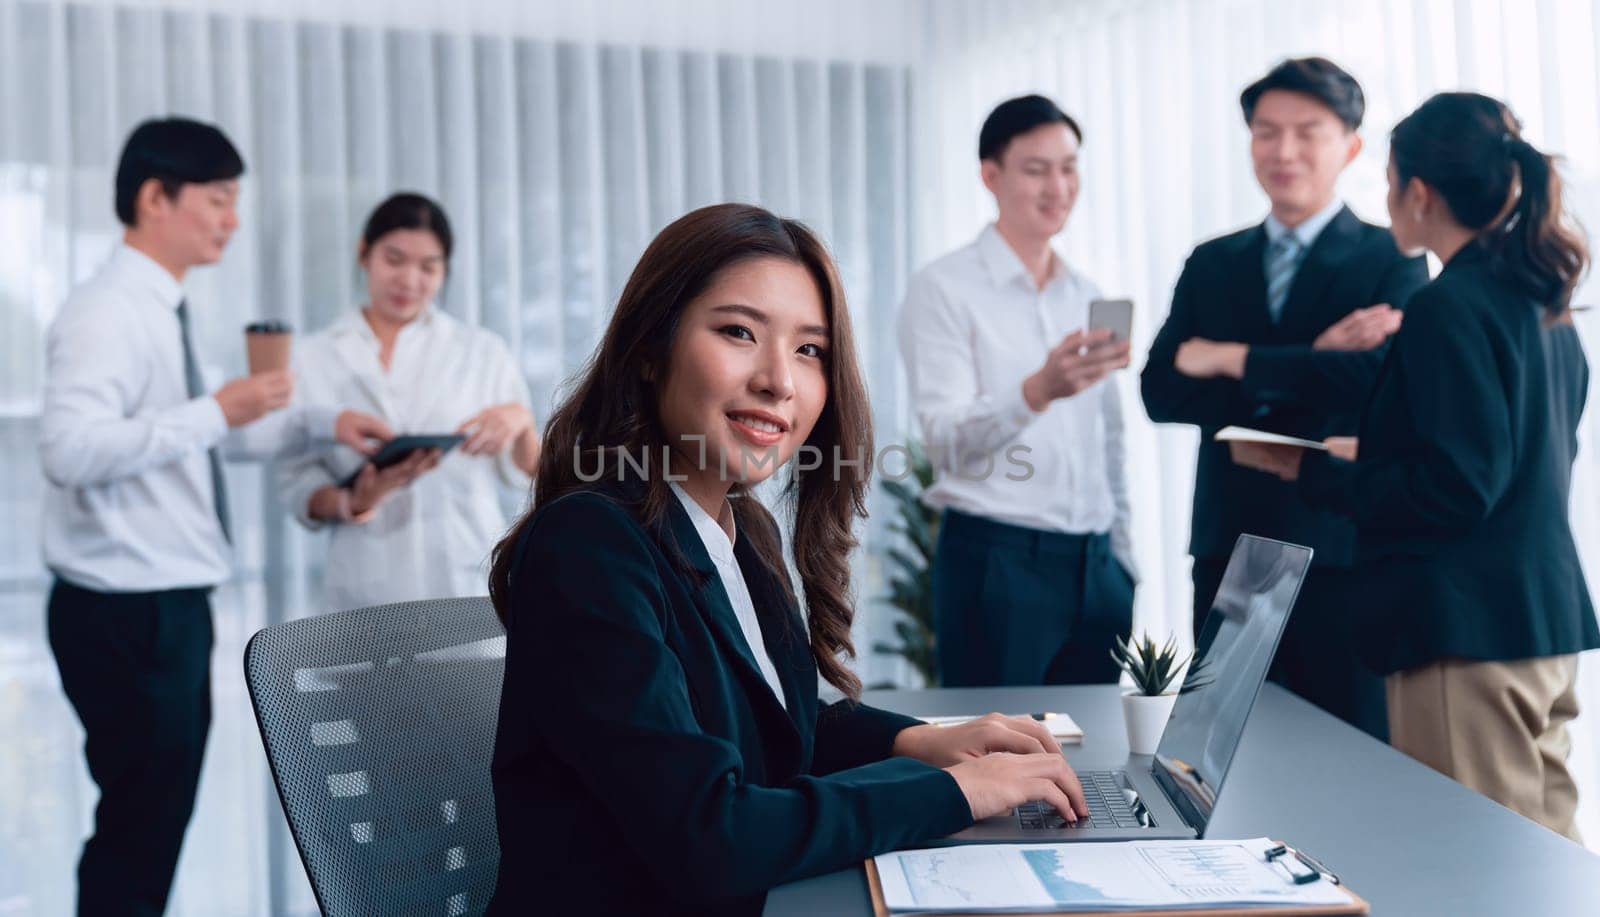 Focus portrait of asian female manger with blurred colleague figures in harmony. by biancoblue